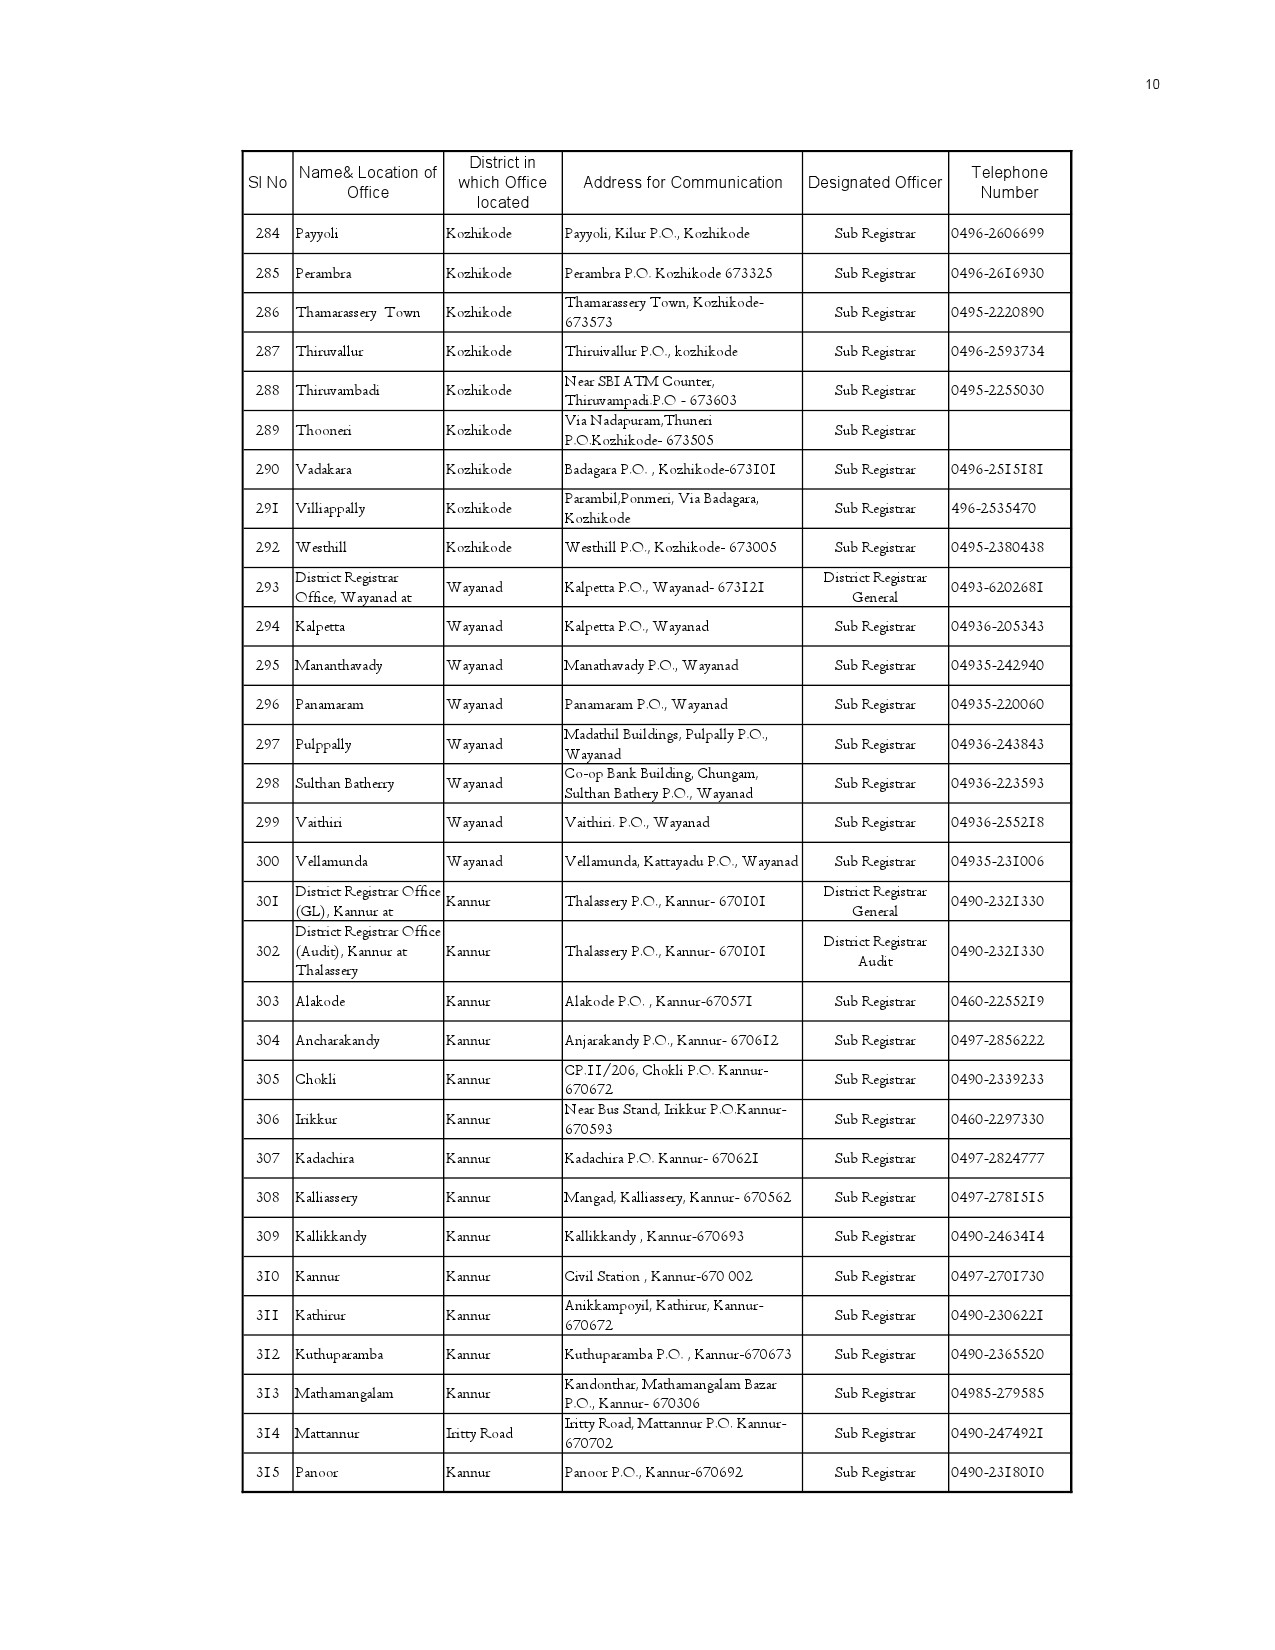 List of Offices in Kerala under the Department of Registration - Notification Image 10